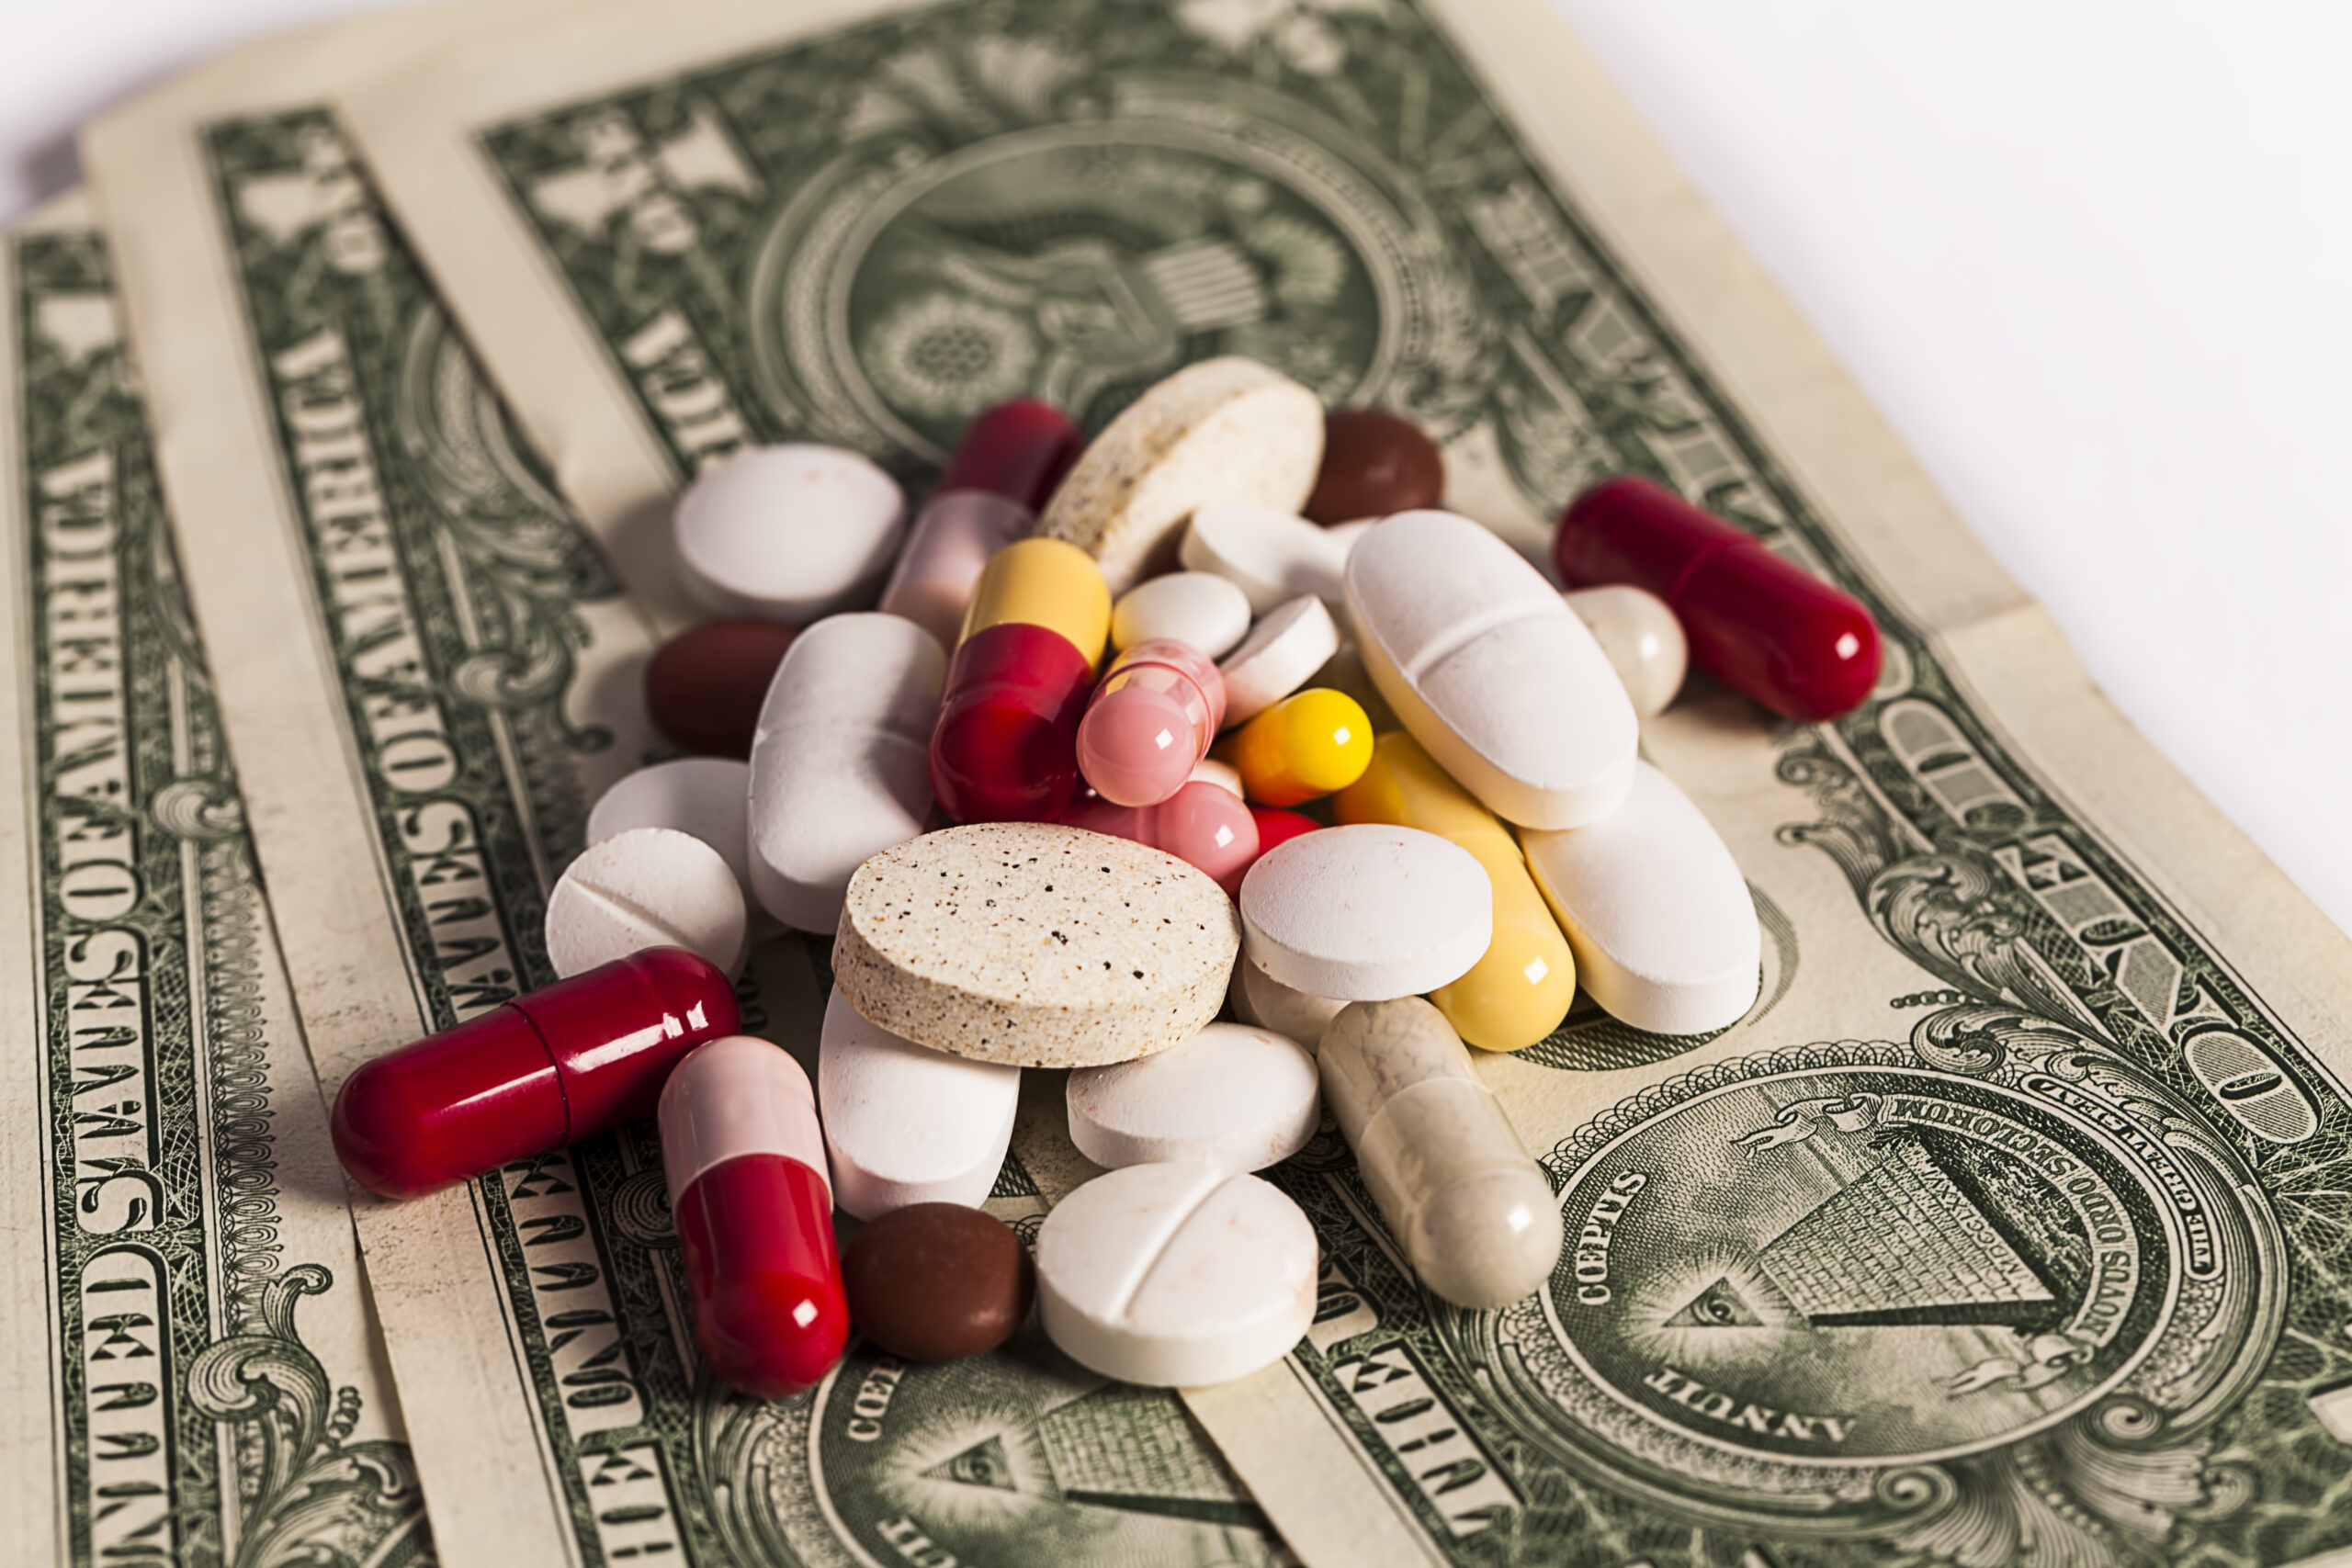 Use Of Generic Heart Medications Could Save $600 Million Annually